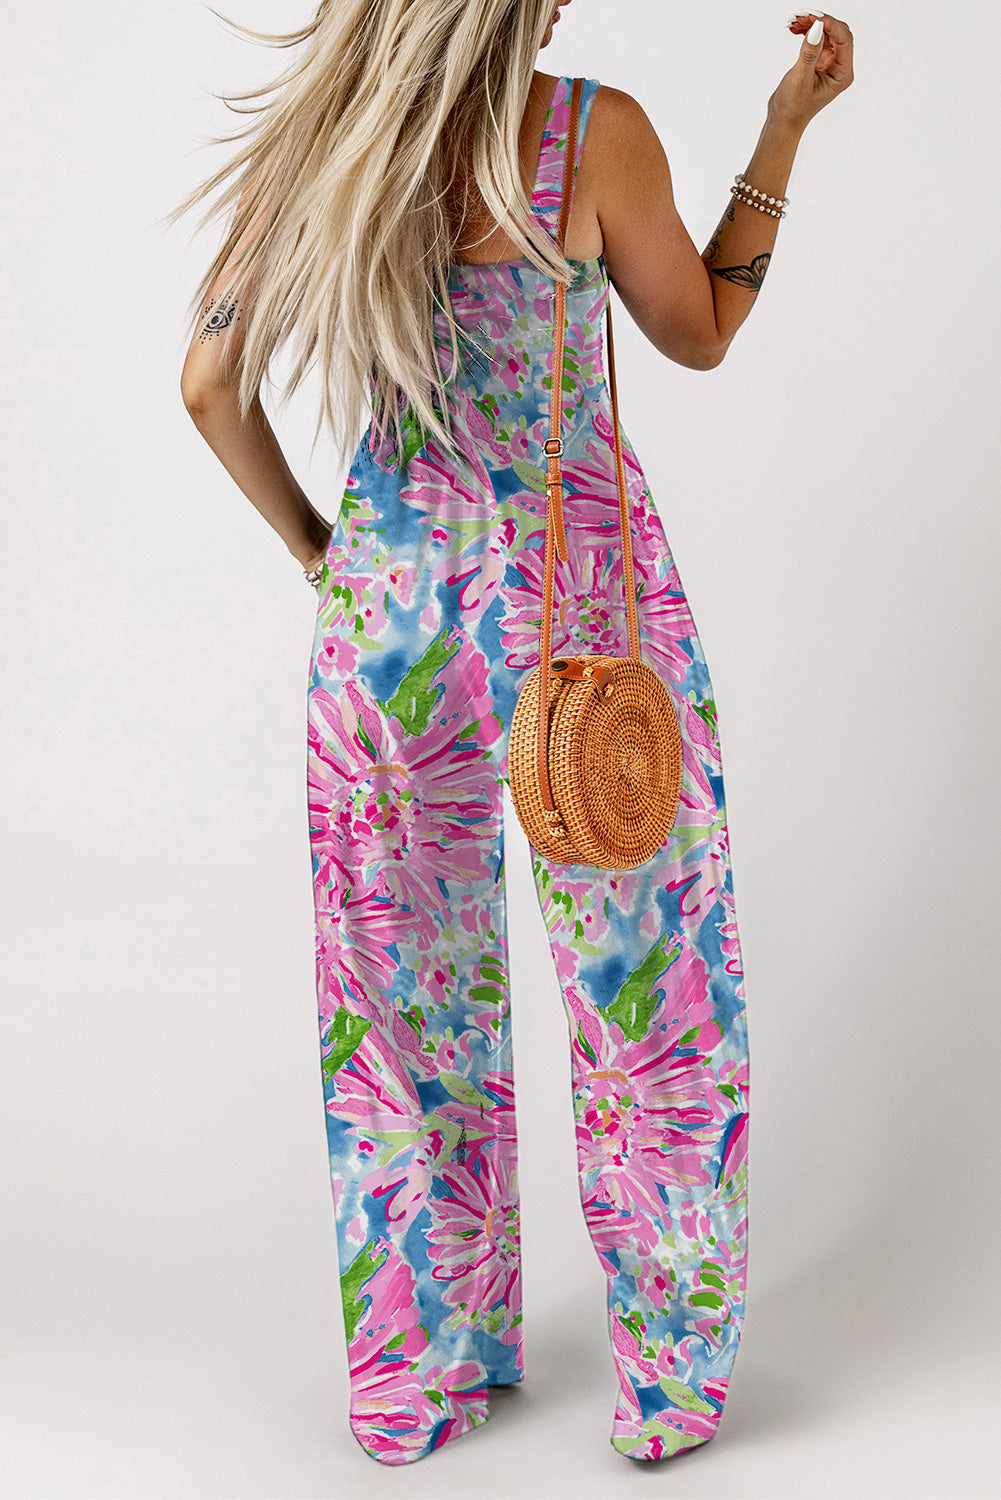 Palm Beach Floral Smock Sleeveless Wide Leg One Piece Pocket Pant Jumpsuit